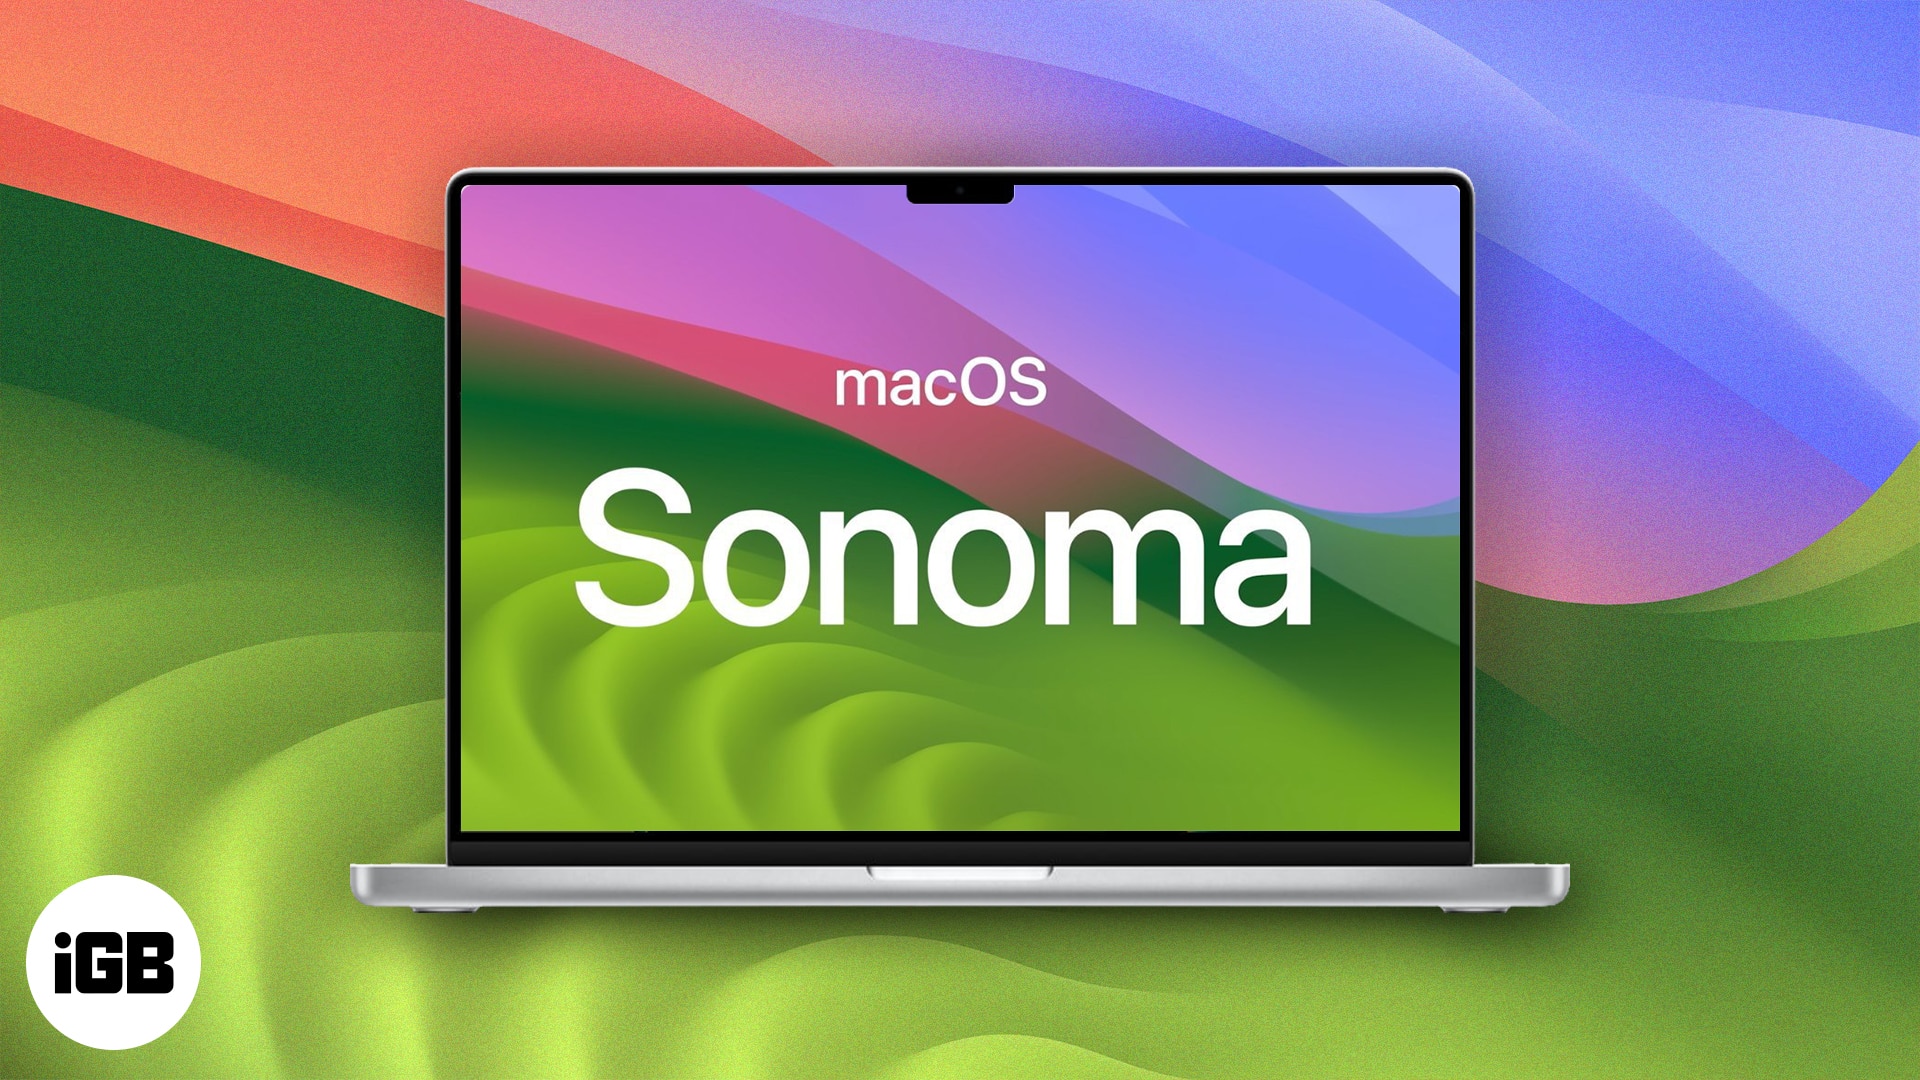 How to prepare your mac for macos sonoma